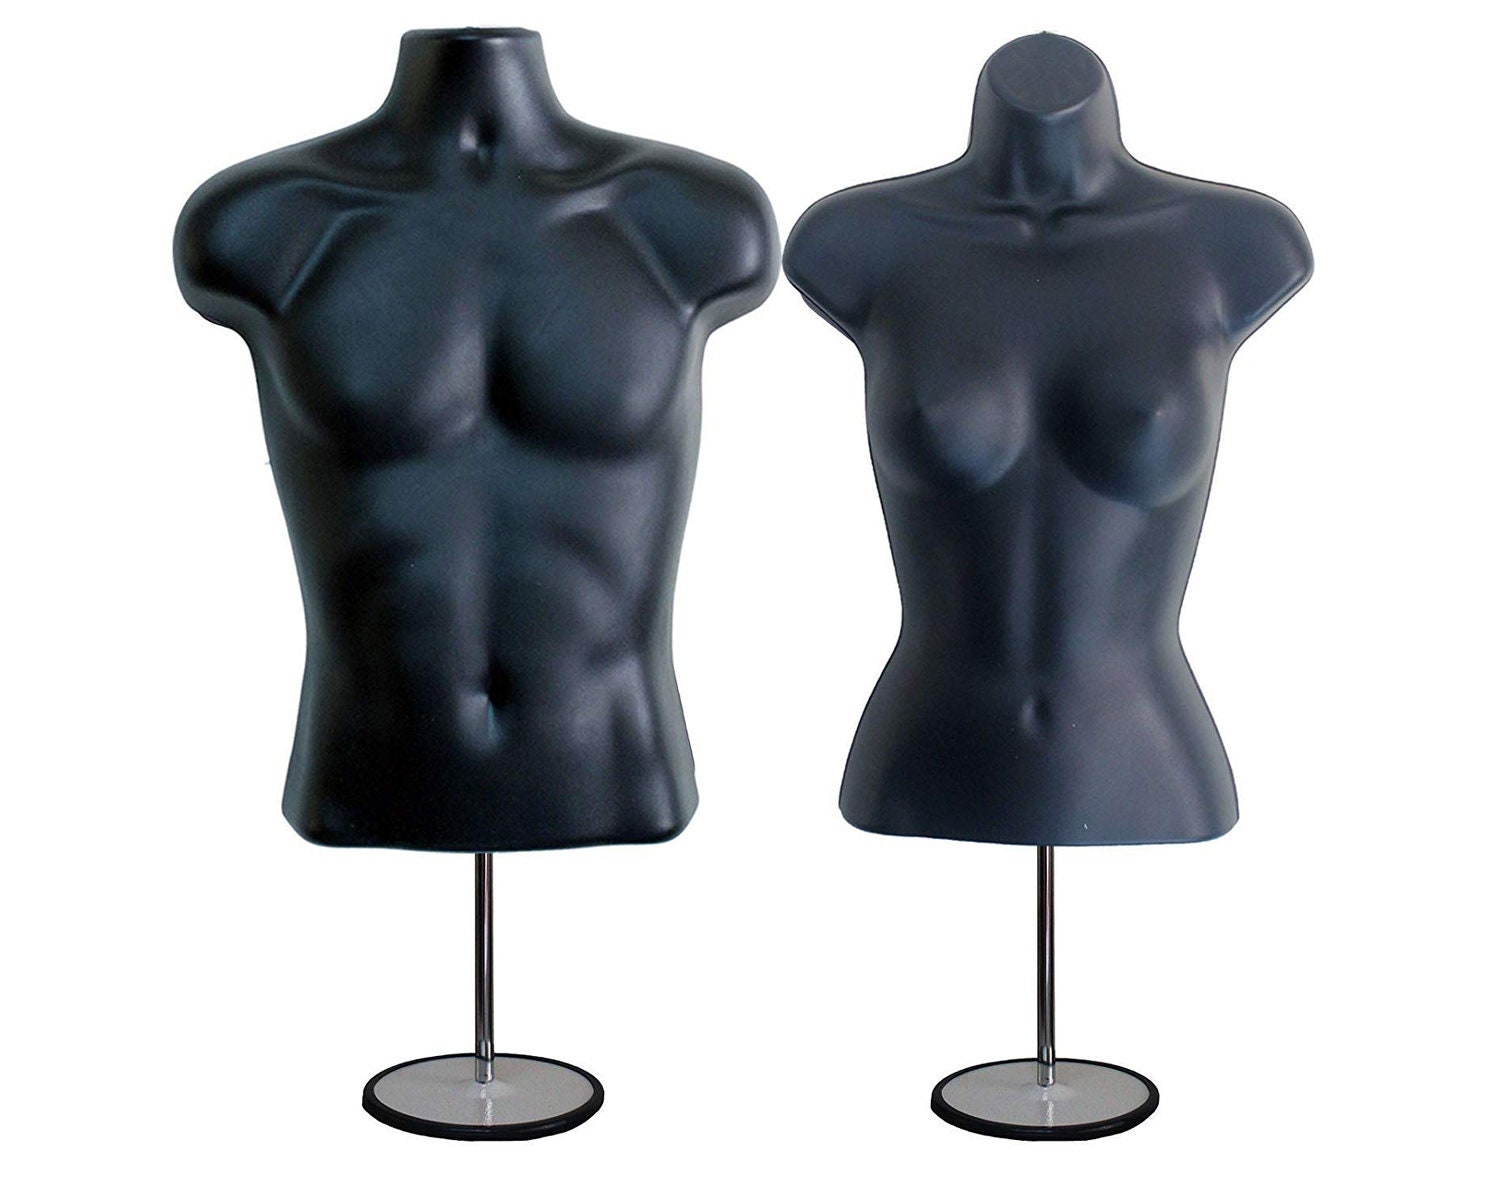 Male Headless Torso Mannequin with Removable Arms